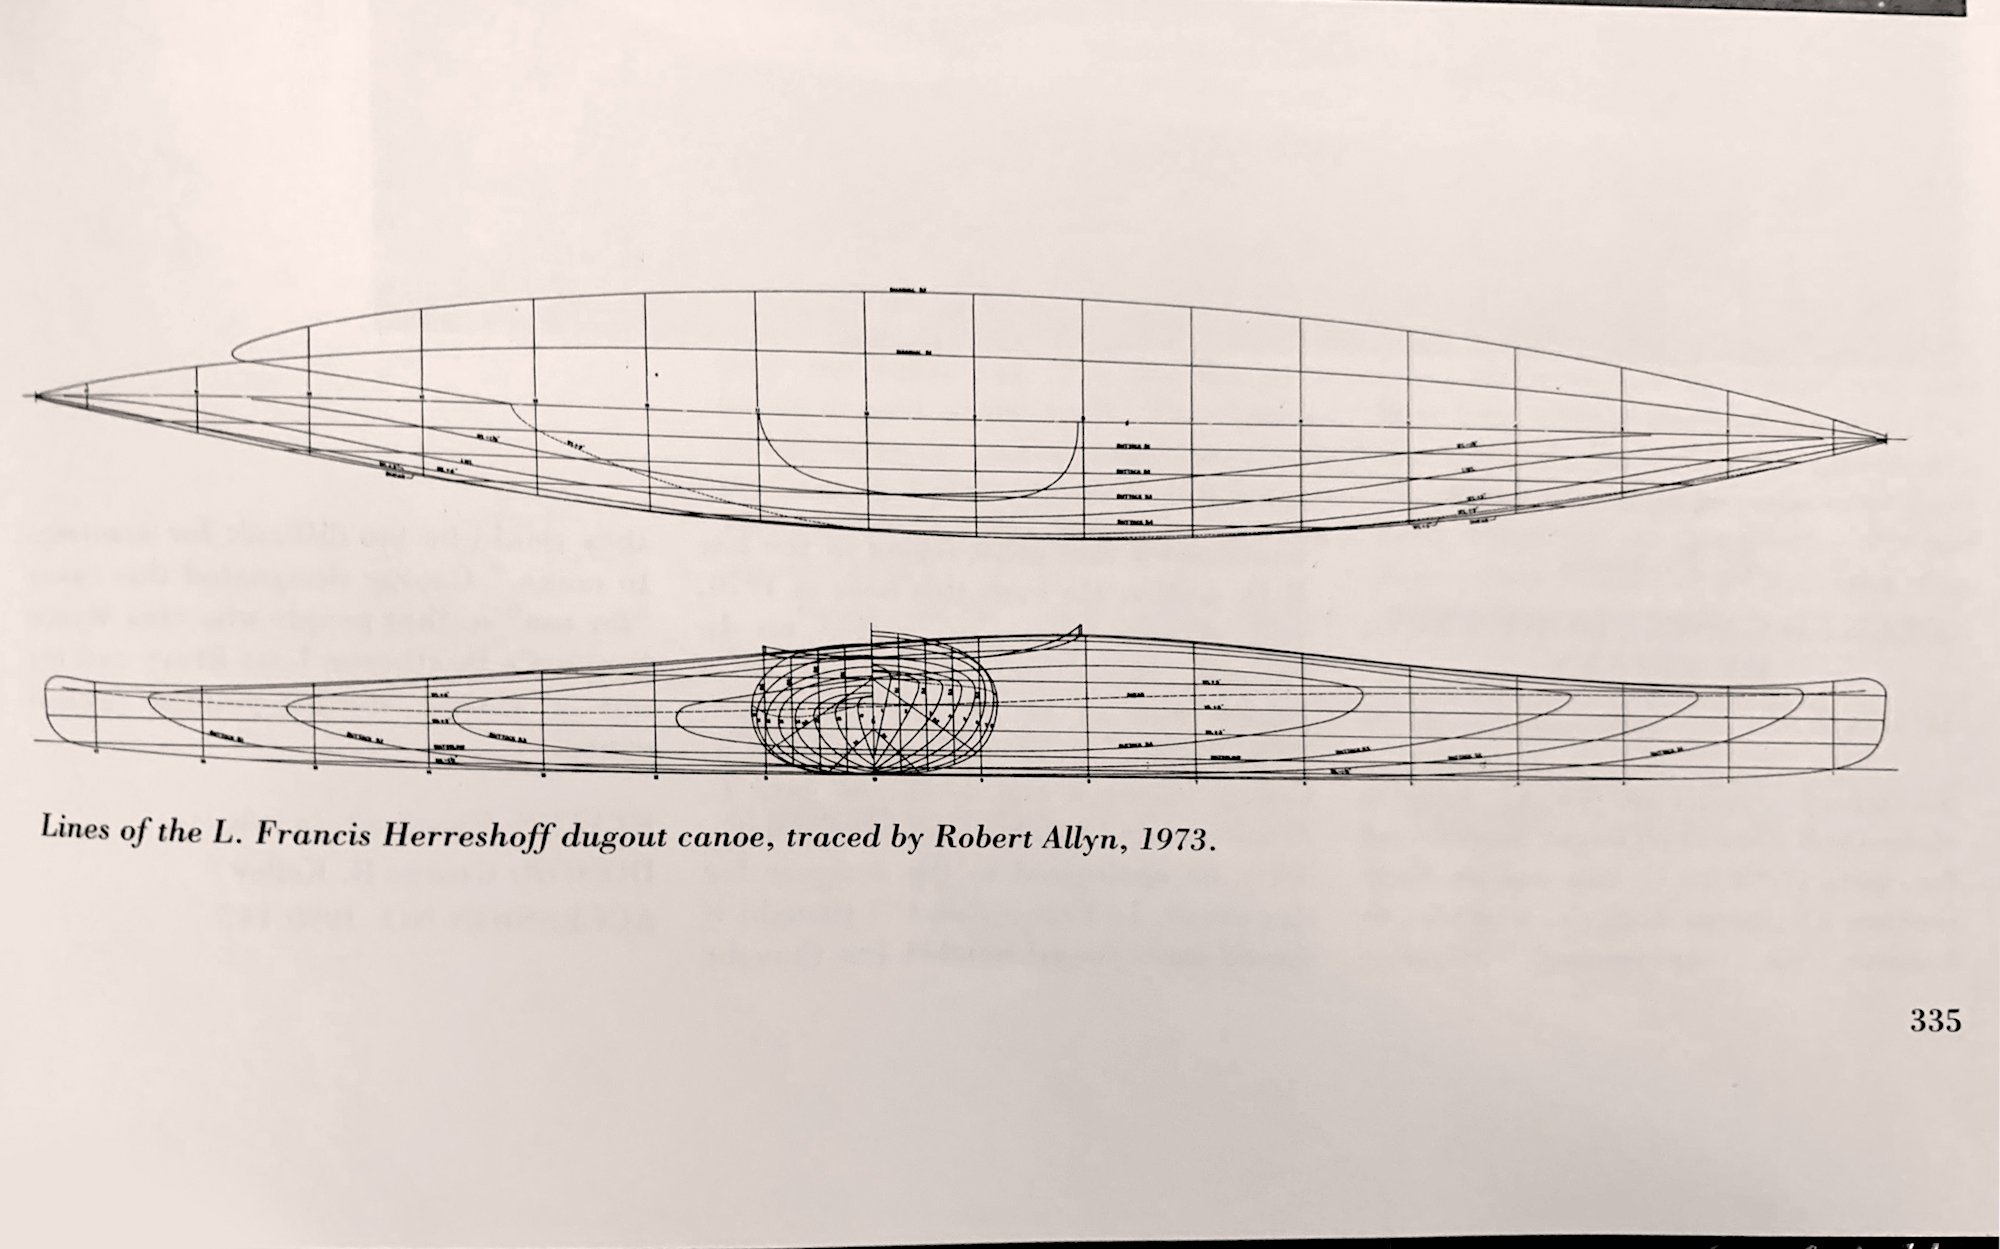 L Francis Herreshoff was a canoe enthusiast, here his treatment of an elegant kayak